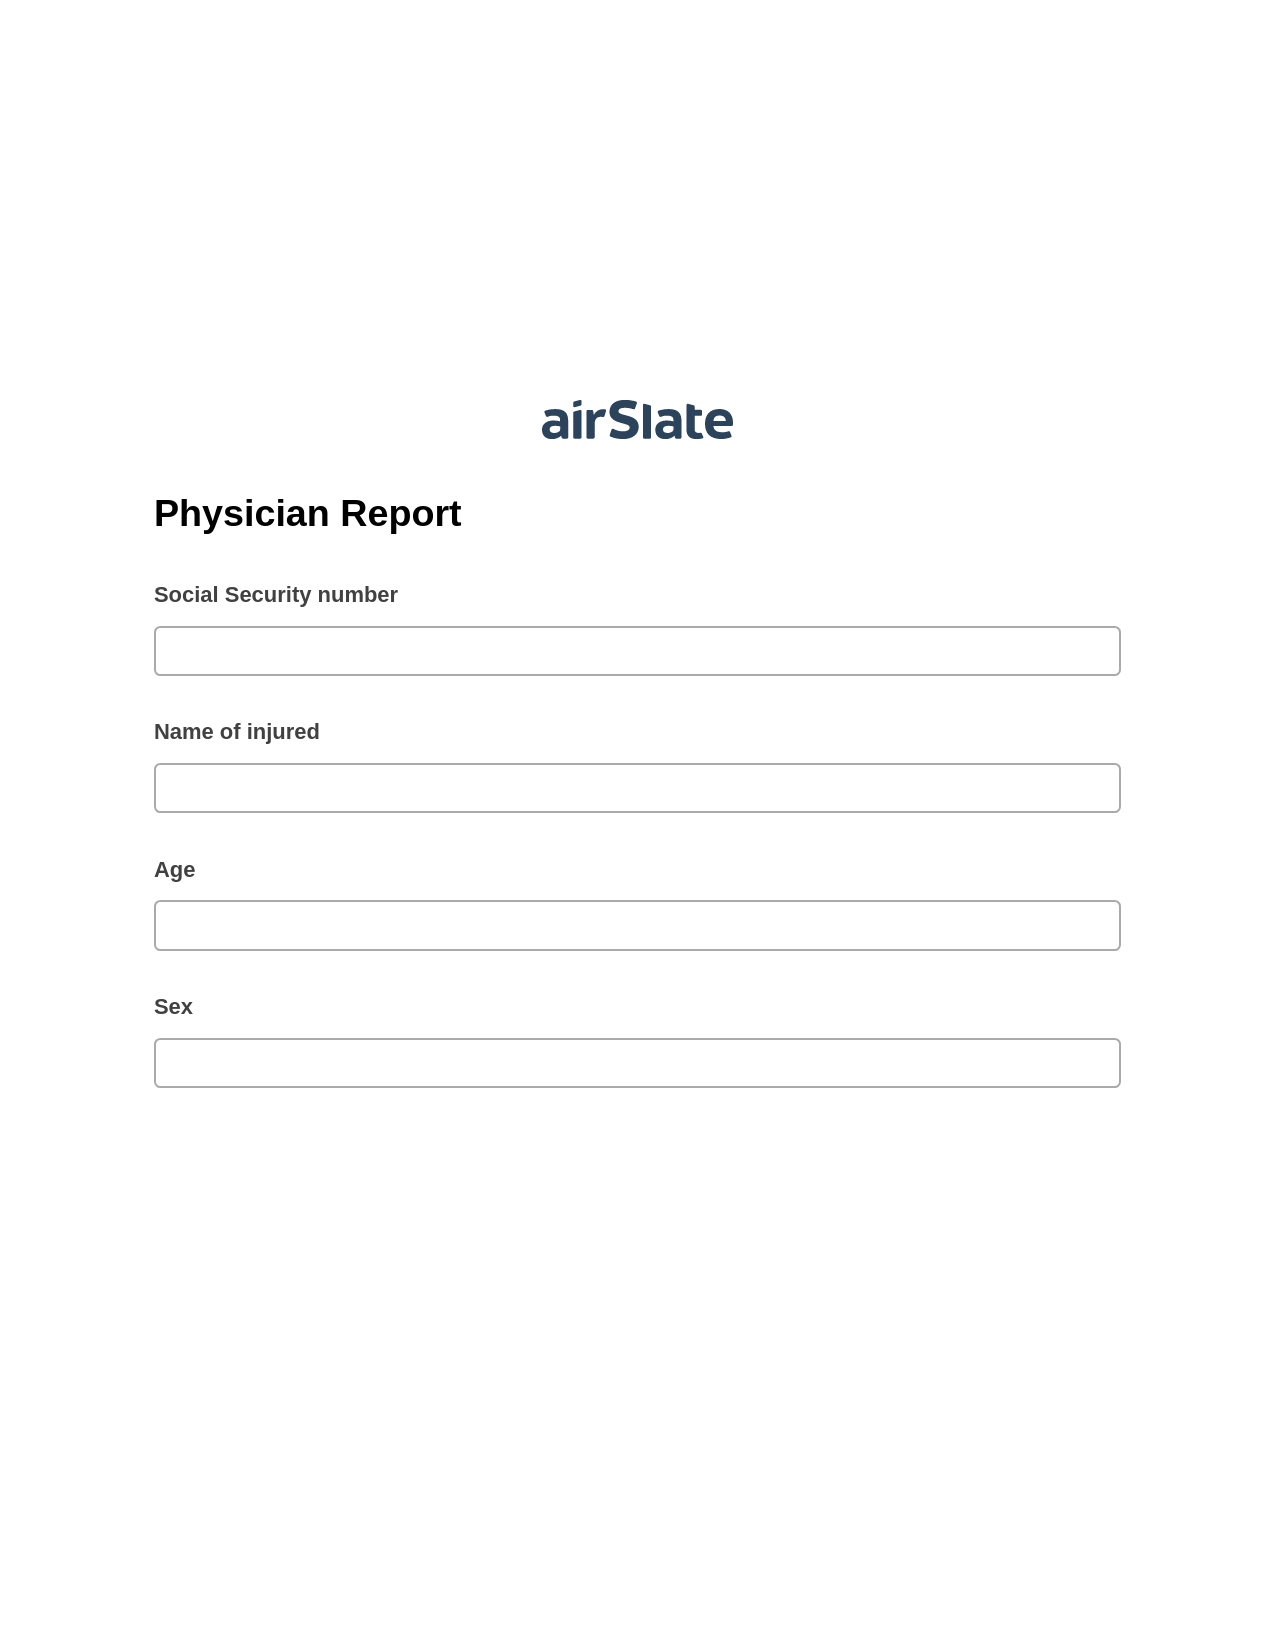 Multirole Physician Report Pre-fill from Excel Spreadsheet Bot, Update NetSuite Record Bot, Archive to Box Bot